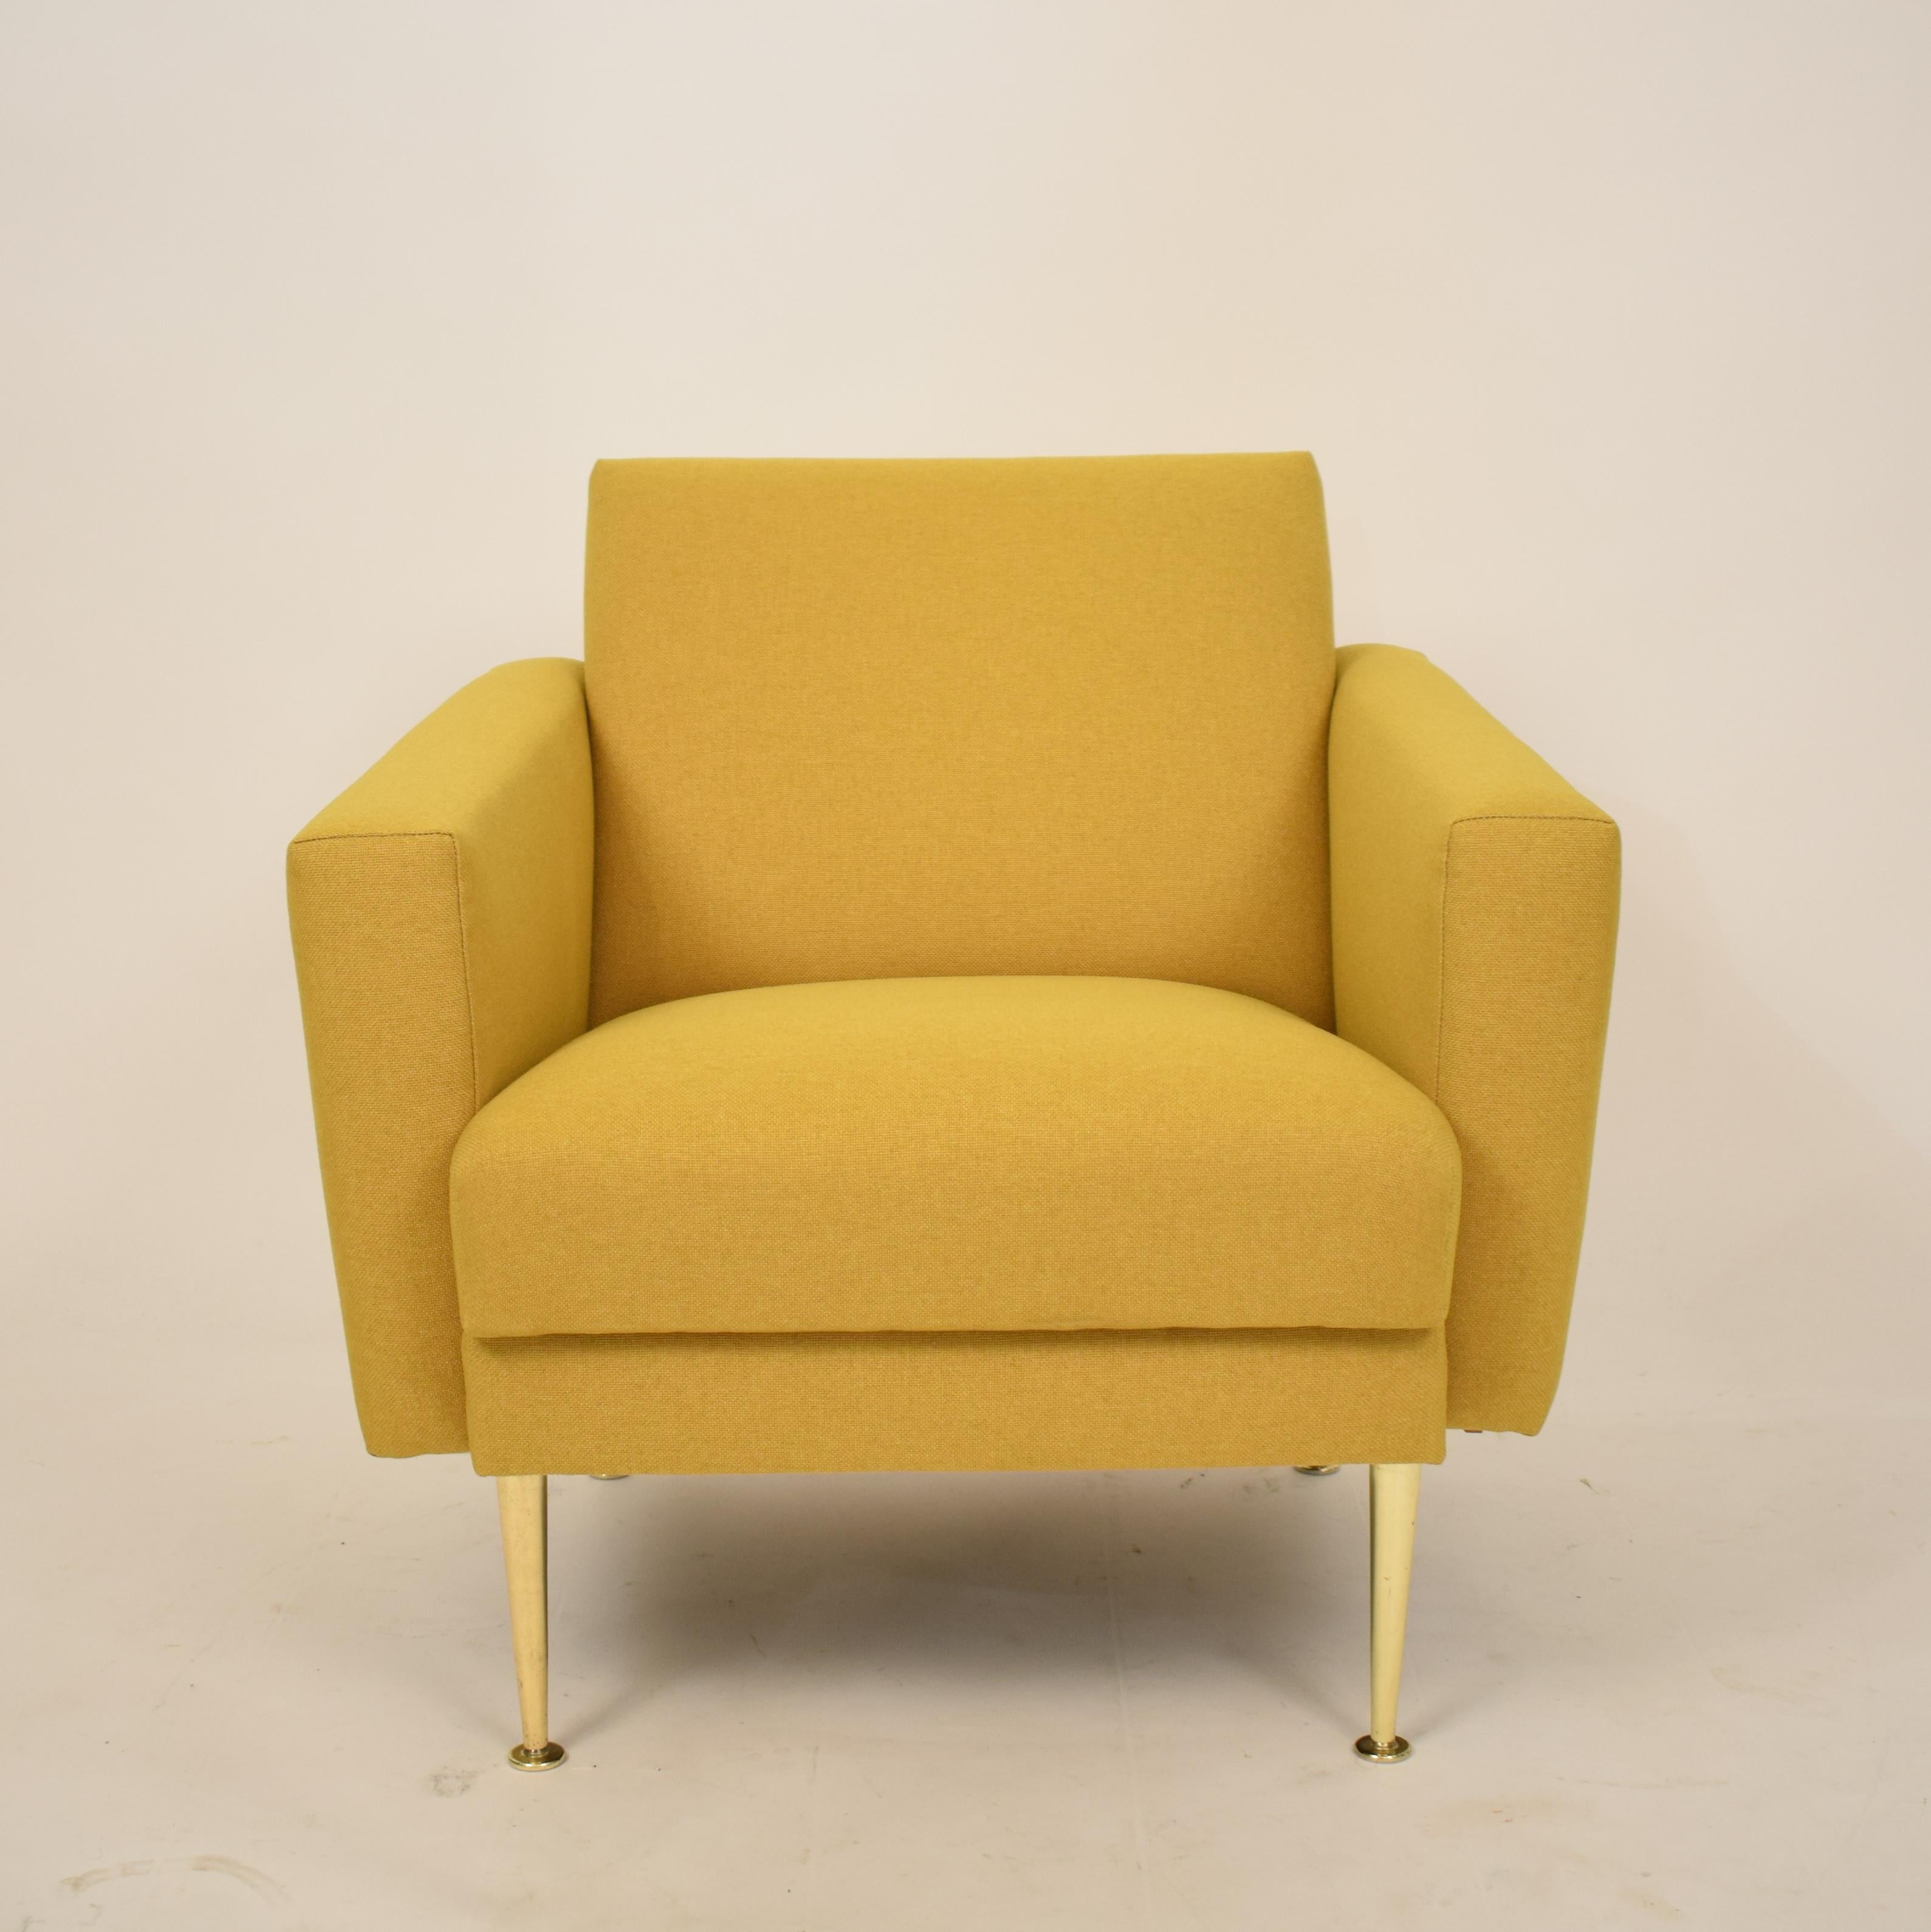 This elegant midcentury lounge chair or armchair was made in the 1950s in Germany. It is made in the style of Pierre Guariche L-10 Model for Airborne.
It is a beautiful model and was recently reupholstered and covered with a yellow fabric. The